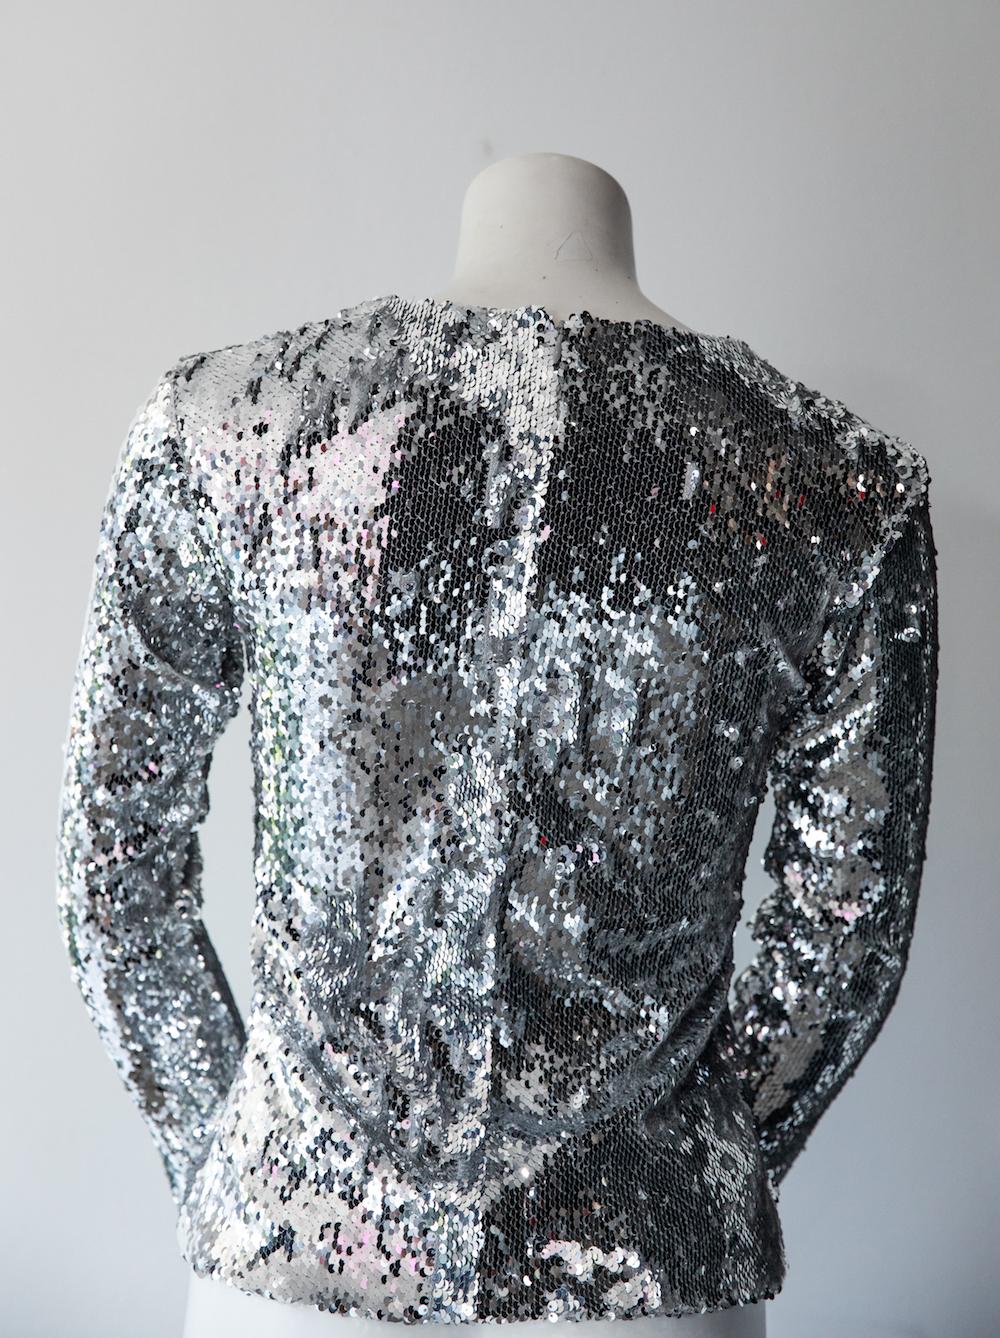 Racil long sleeve blouse with all-over silver iridescent sequins. New Year's Eve or wear to an evening event. Wear with pants or a skirt! New with original tags attached. Fitted, crew-neck silhouette with back zip closure. 

Size XS